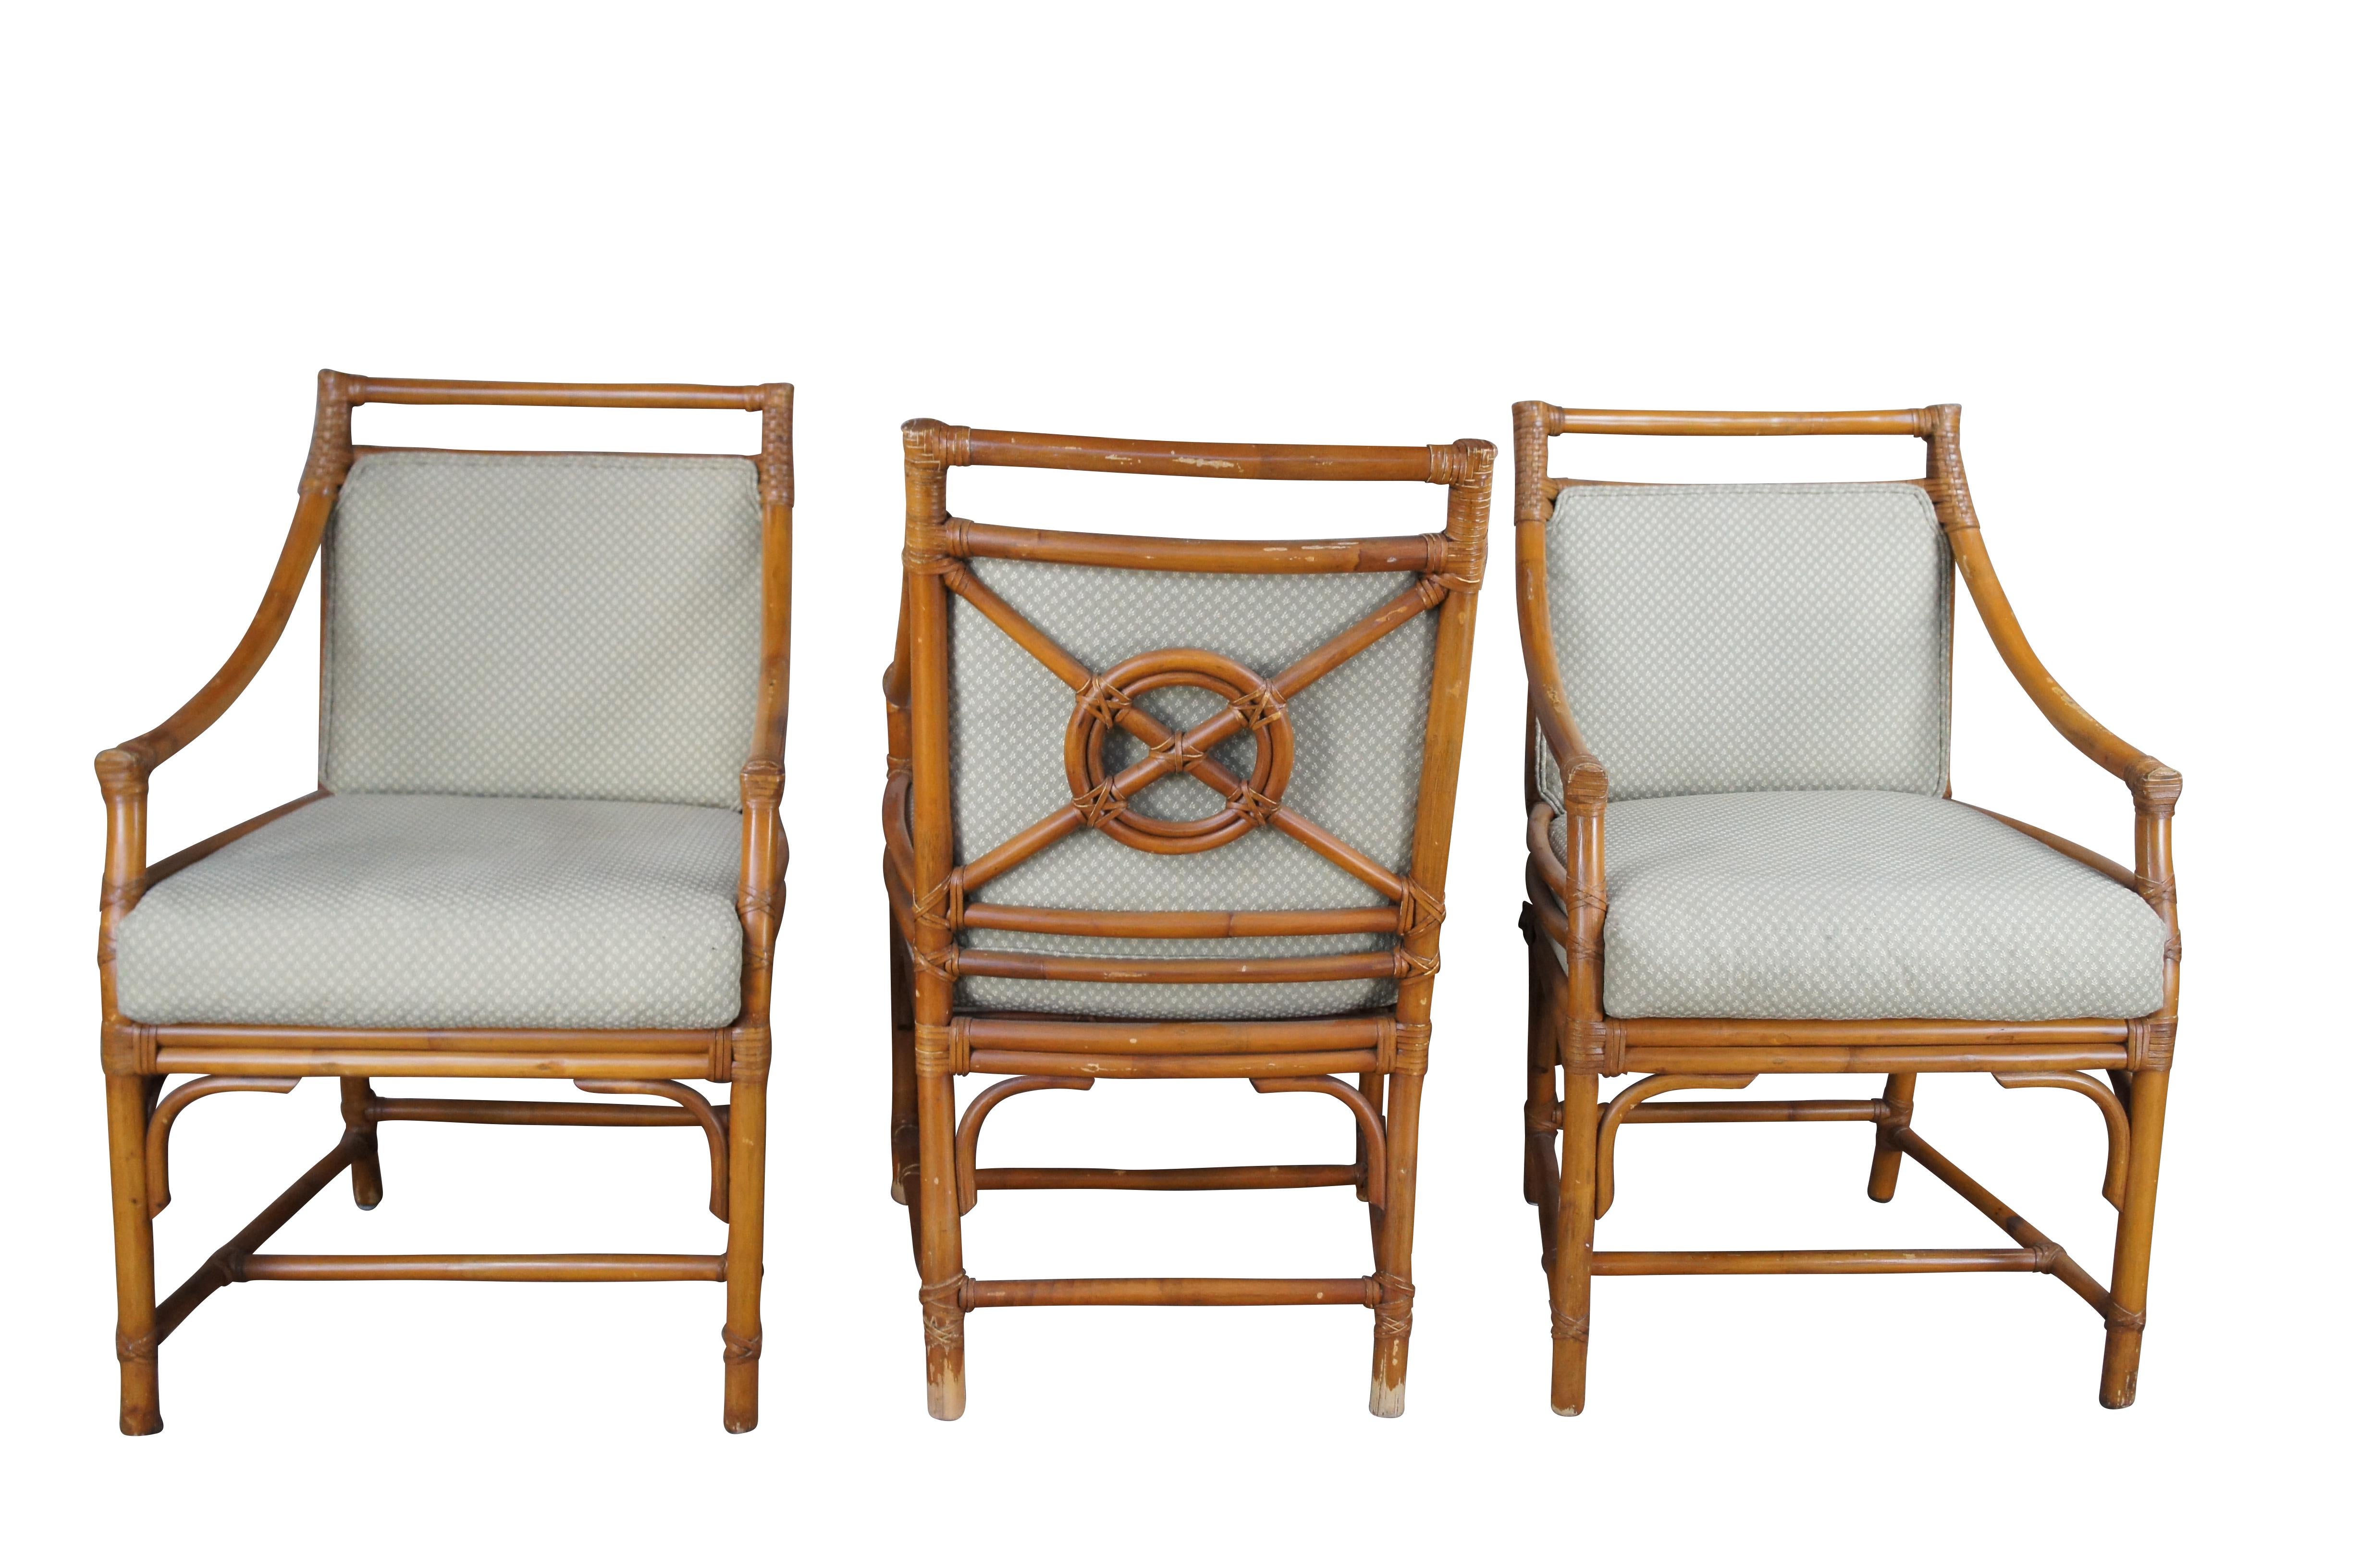 Set of Iconic target back Arm Chairs by The McGuire Furniture Company. Organic Modern with Bohemian design. Features a faux bamboo and rattan construction with fabric seats. Seats are green with foliate design. 

John and Elinor McGuire founded